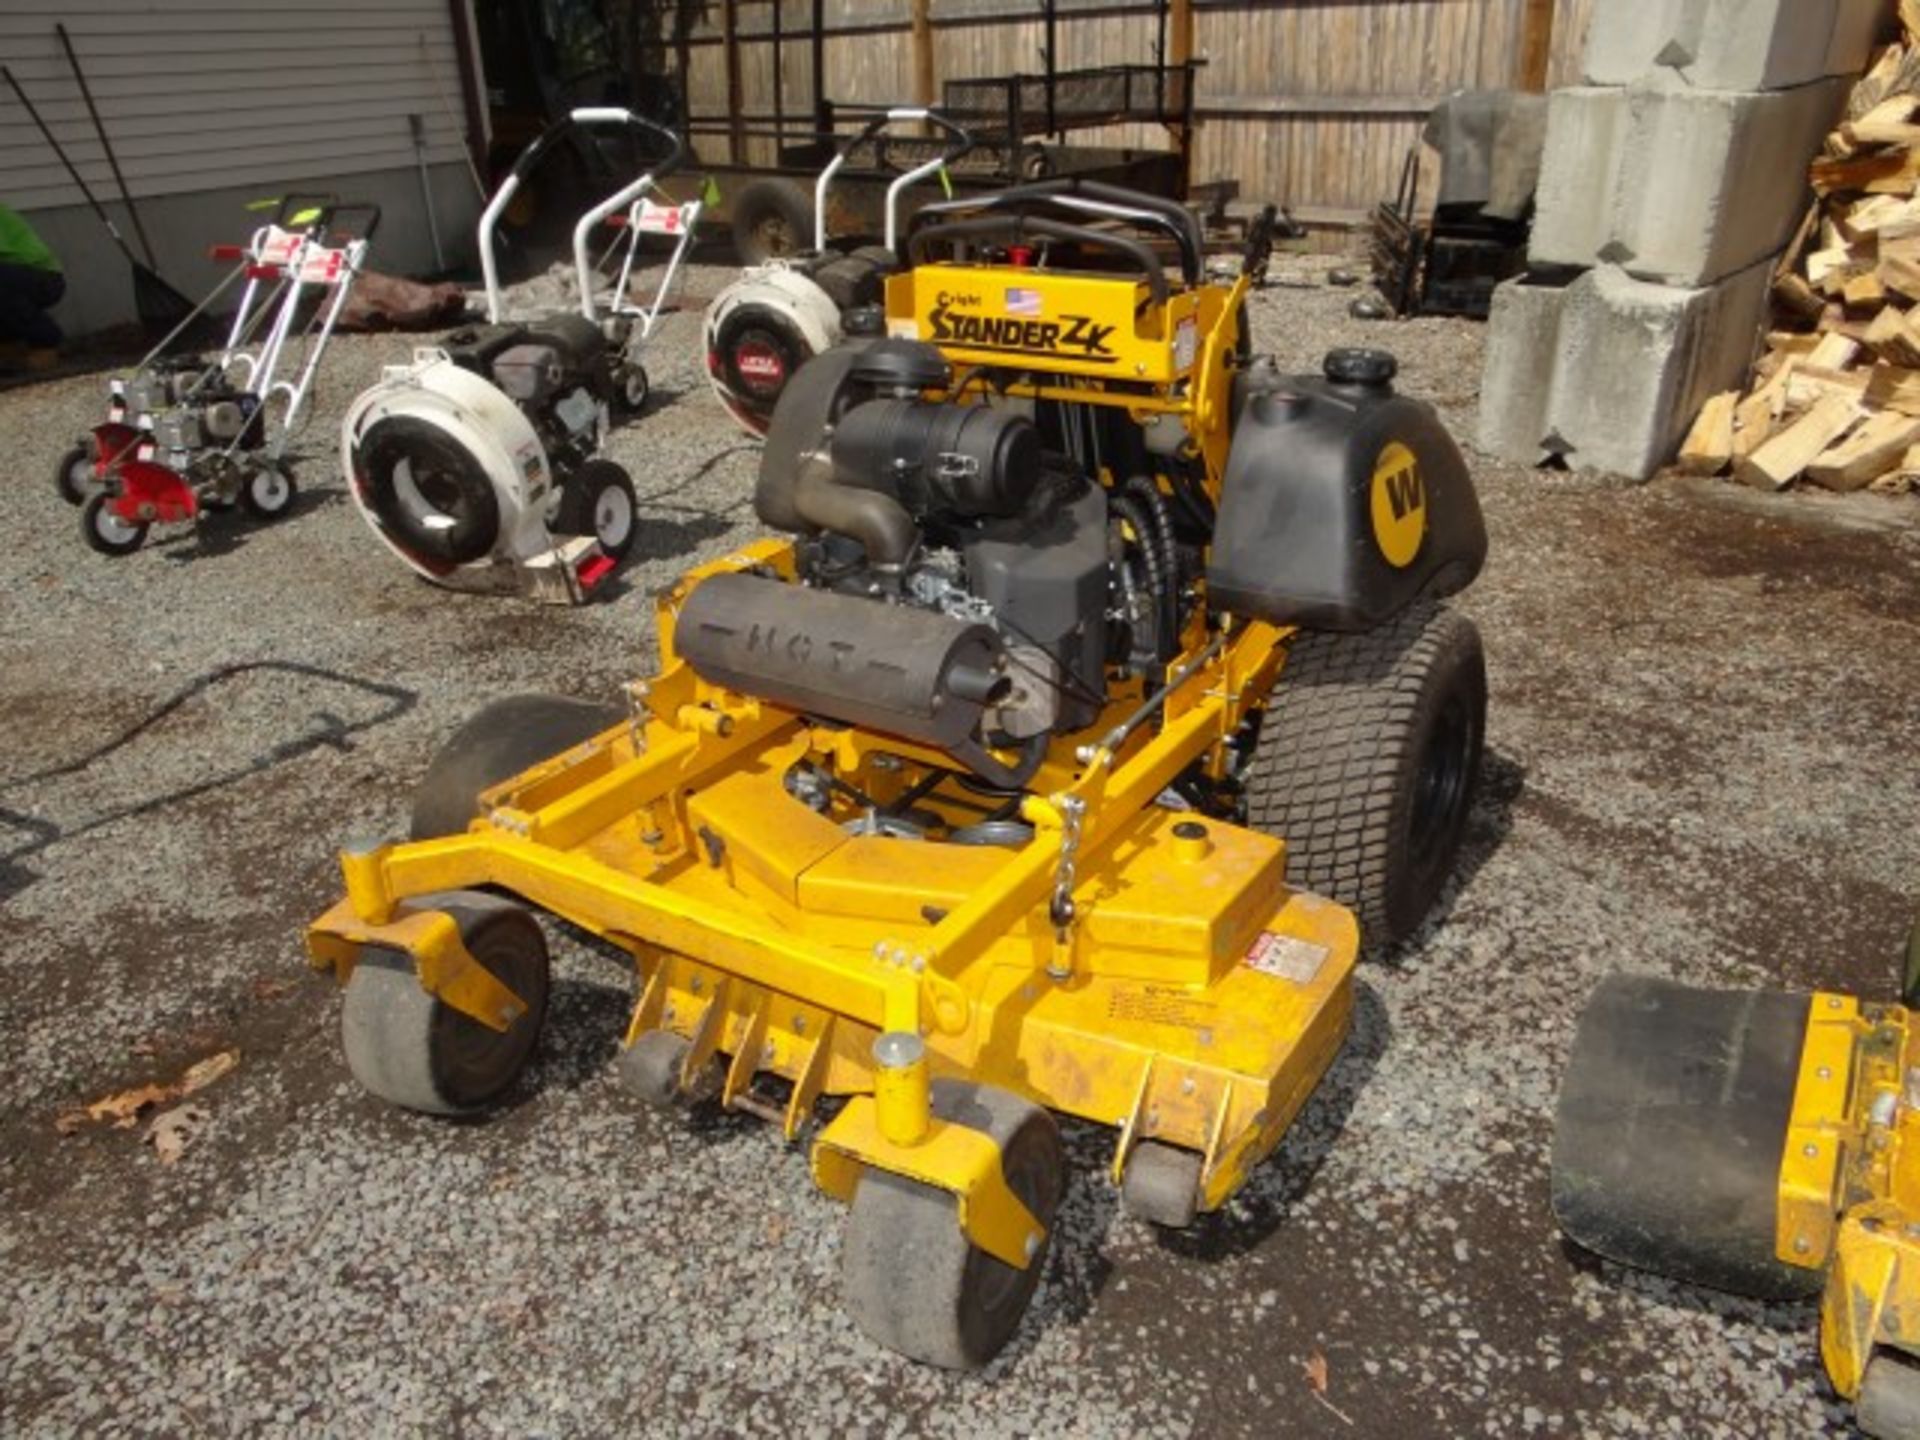 Wright Stander #ZK 52" Stand On Mower, Hrs., 818 - Image 2 of 3